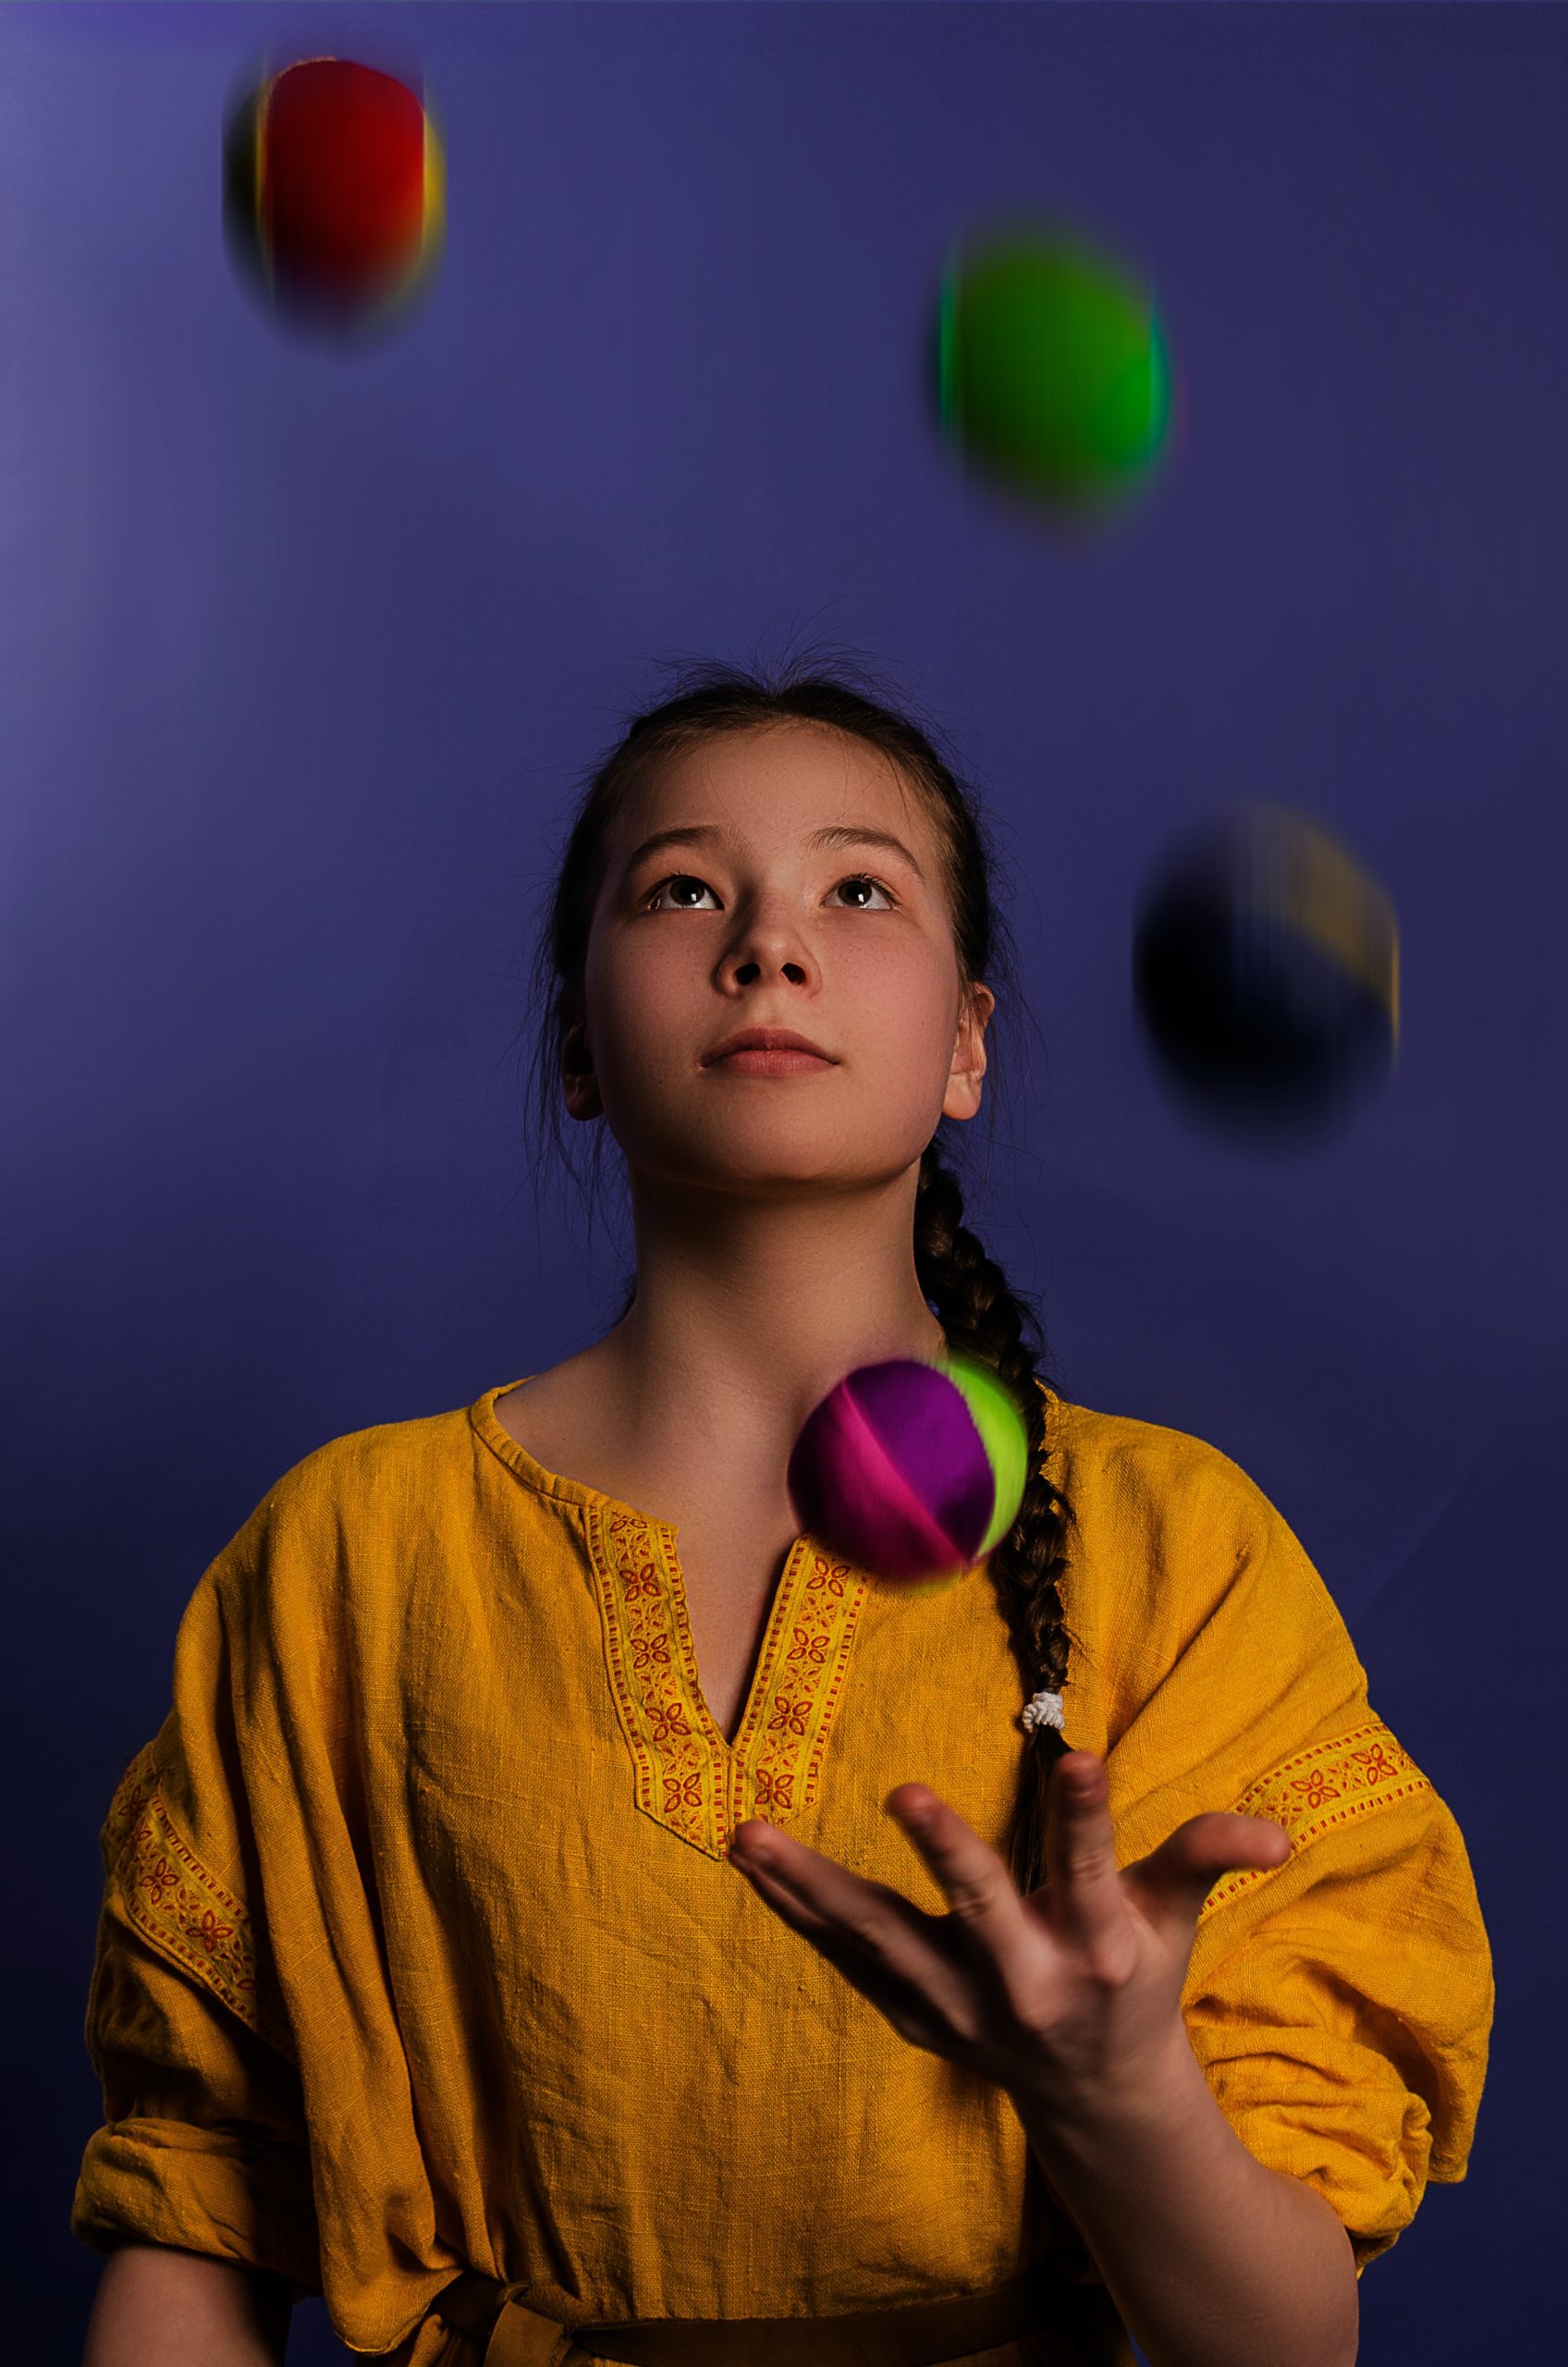 Working Smart, or How Many Balls are You Juggling?